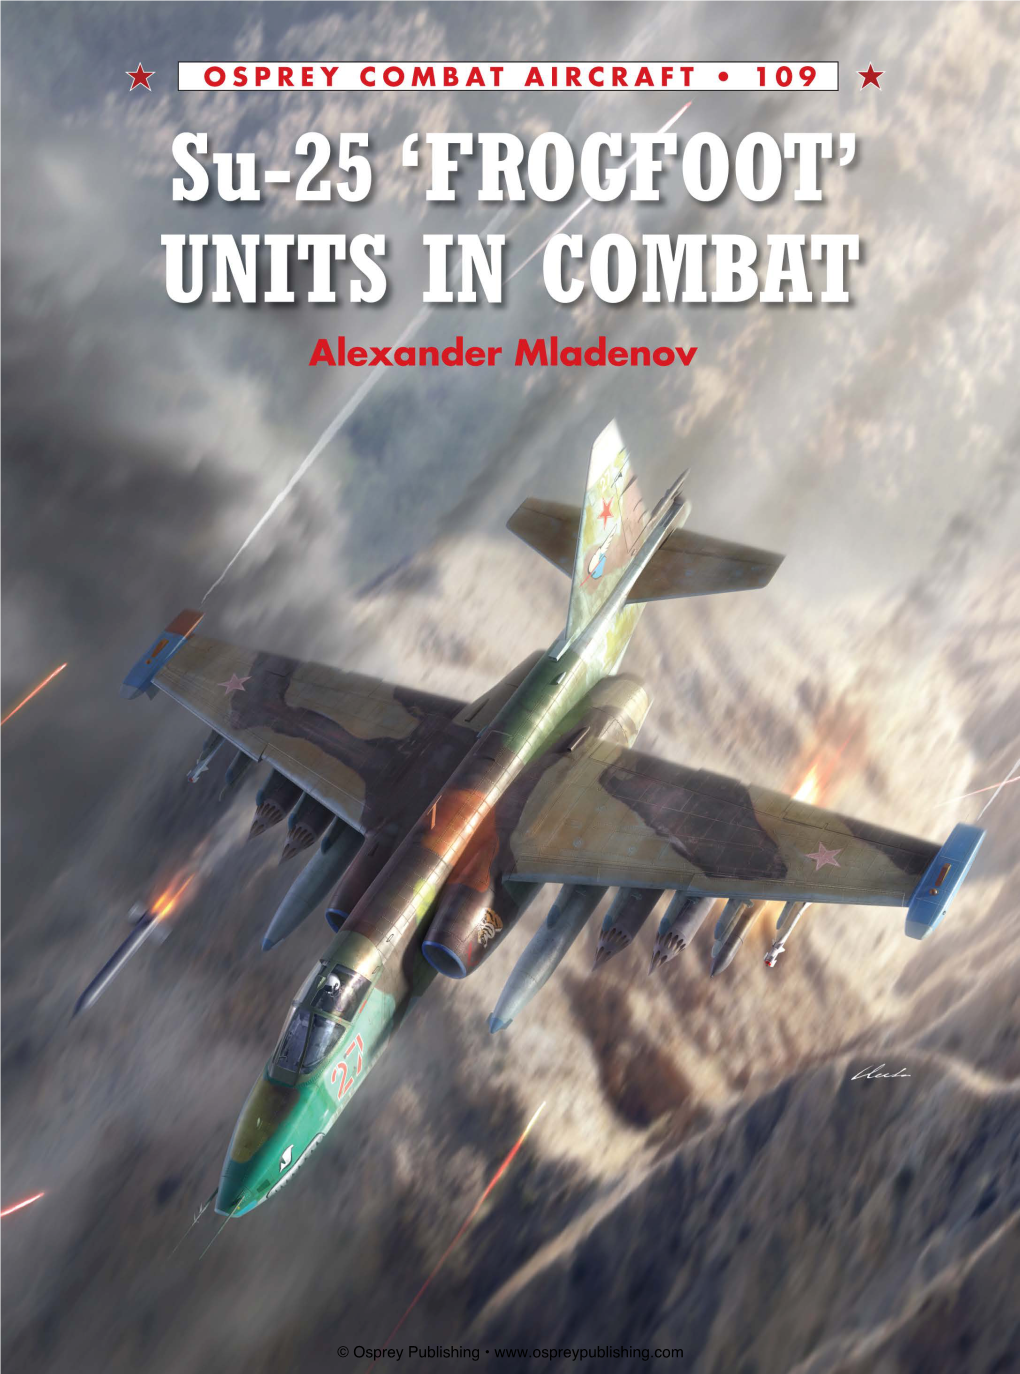 © Osprey Publishing • OSPREY COMBAT AIRCRAFT 109 Su-25 ‘FROGFOOT’ UNITS in COMBAT